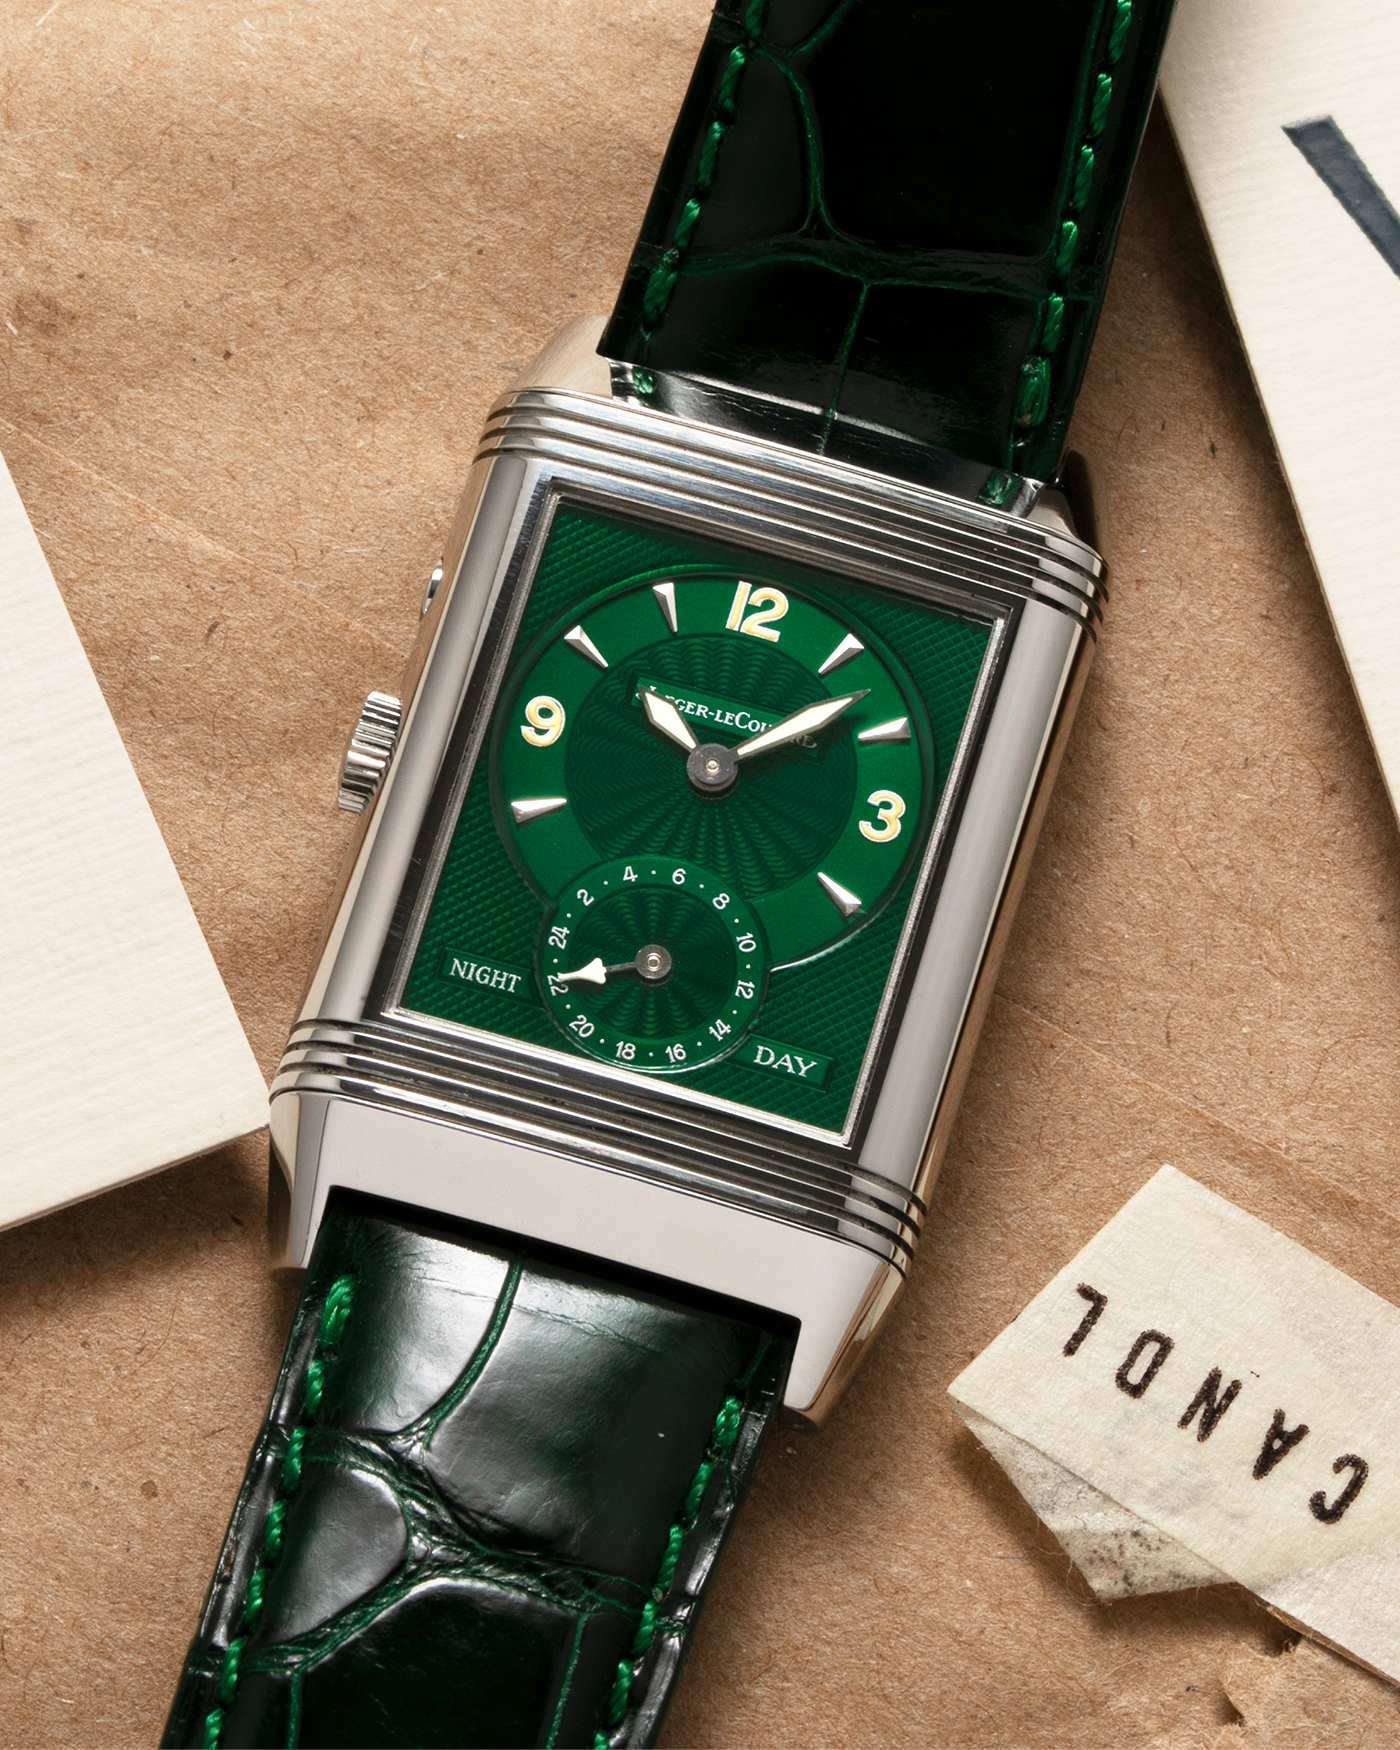 Brand: Jaeger-LeCoultre Year: 1999 Model: Reverso Duo Serie Premier, Ref. 270.8.54 Green Japan Edition Material: Stainless Steel Movement: Cal. 854, Manual-Wind Case Diameter: 42 x 26mm Bracelet/Strap: Emerald Green Crocodile Leather Strap with Signed Stainless Steel Deployant Clasp